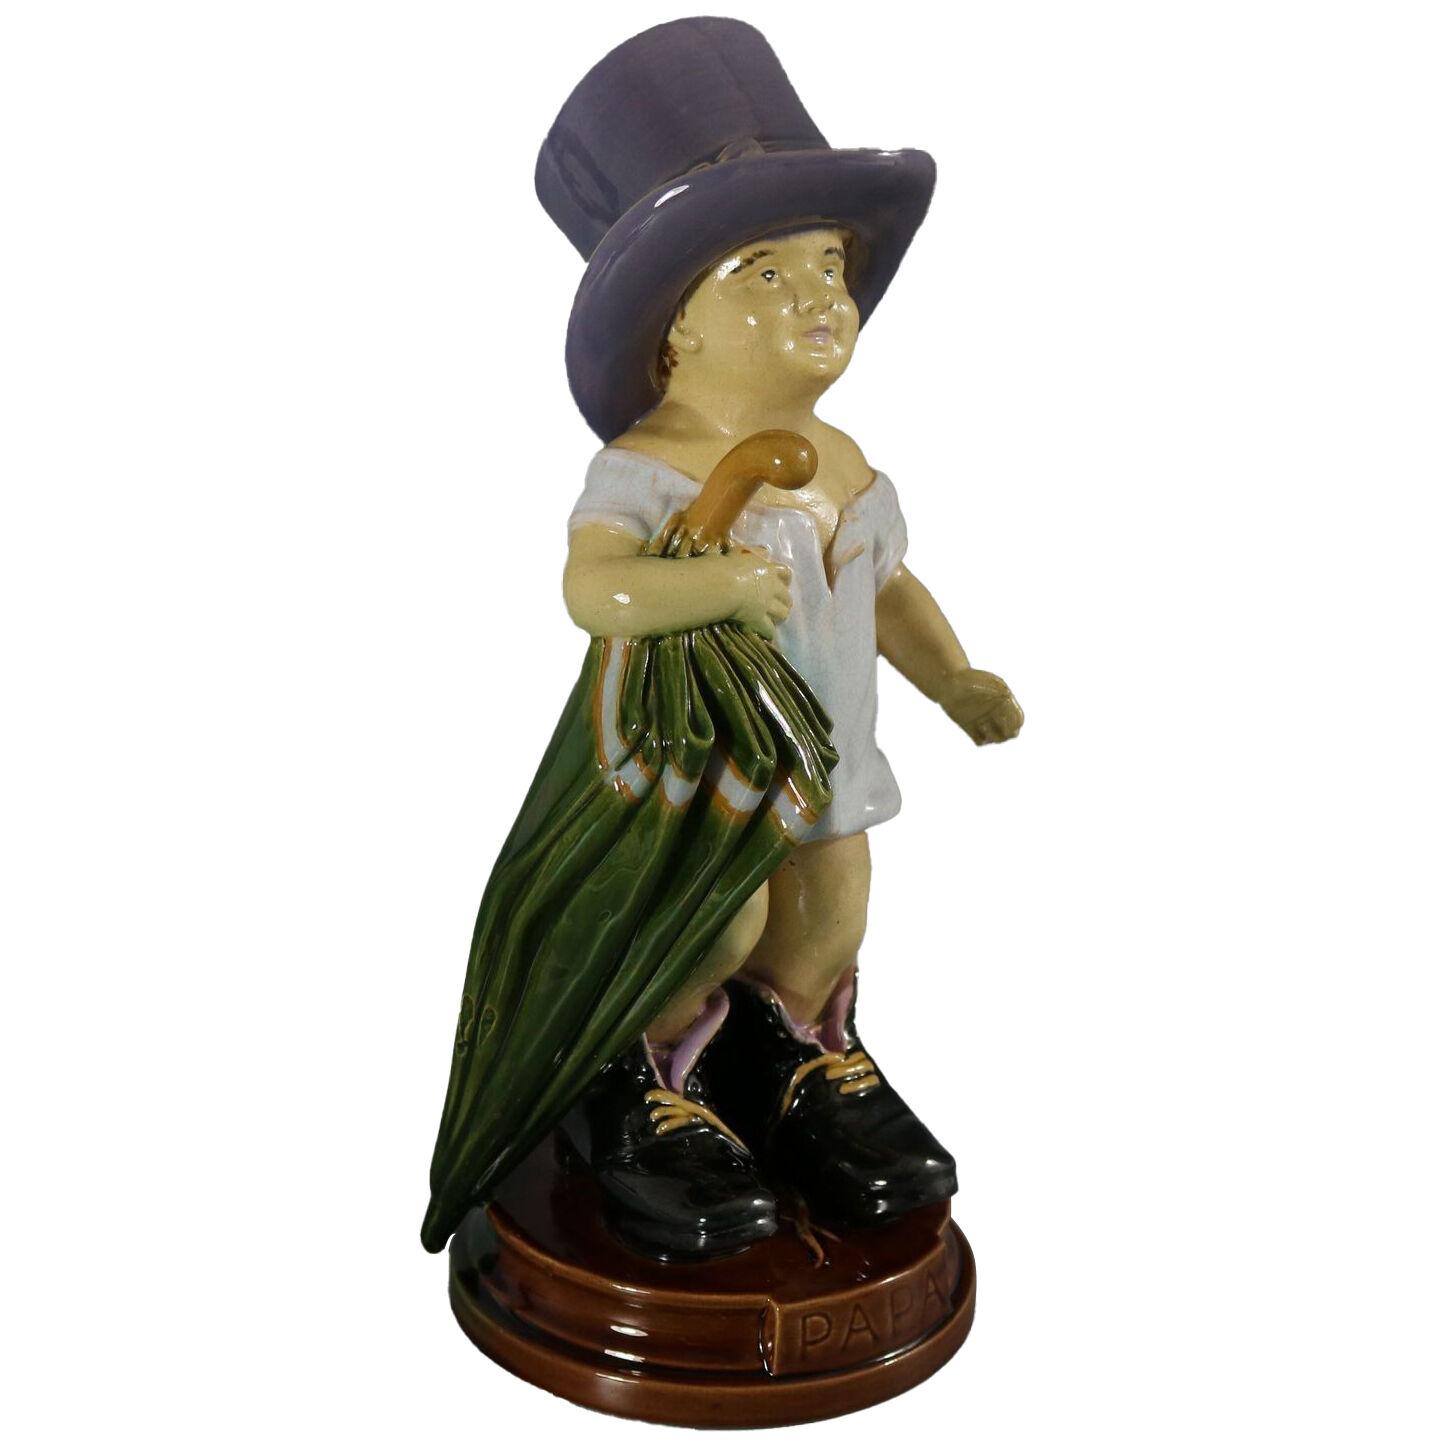 Brownfield Majolica Figure of a Child, Titled PAPA